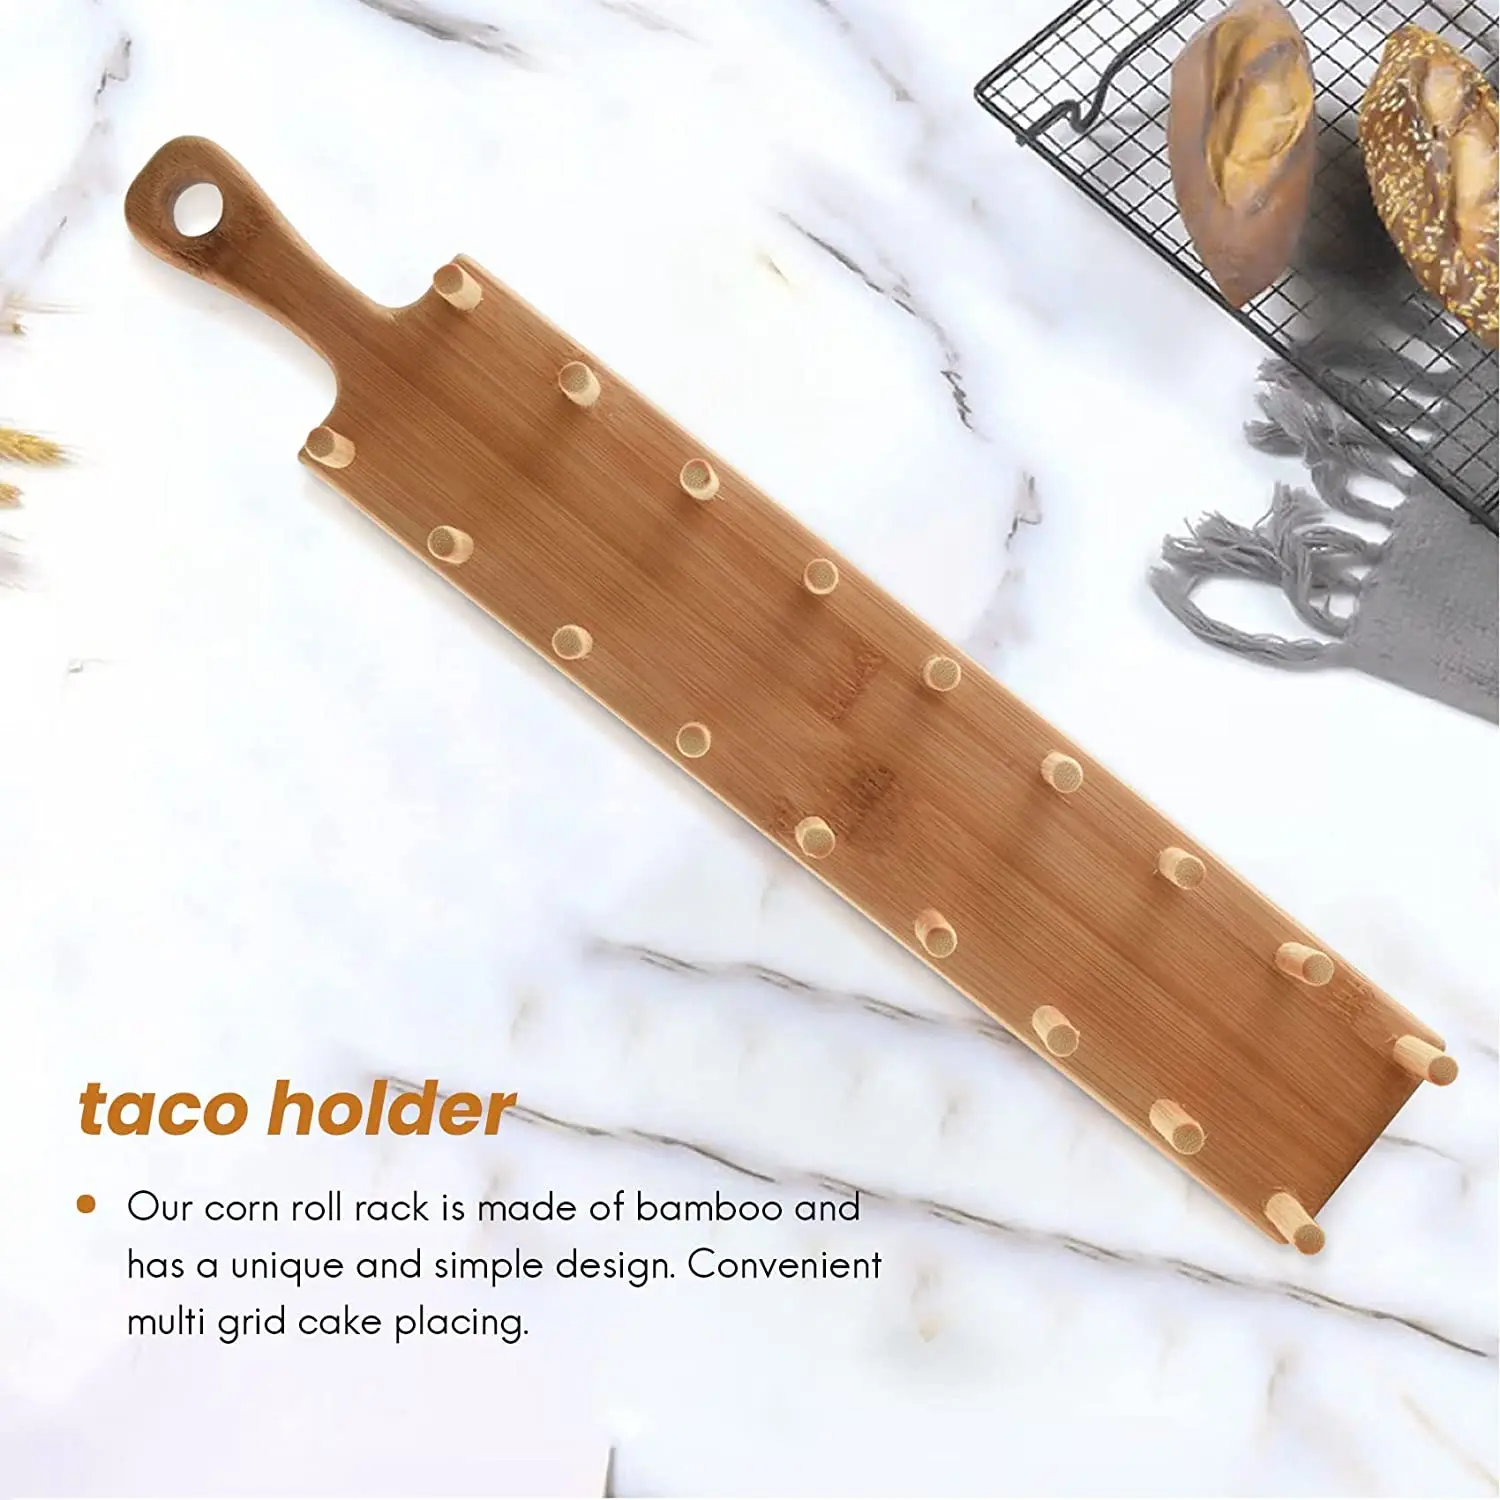 New Arrival Taco Rack Holds  Wooden Corn Roll Rack Good Quality Bamboo Taco Holder Stand Plate Tray With Handle